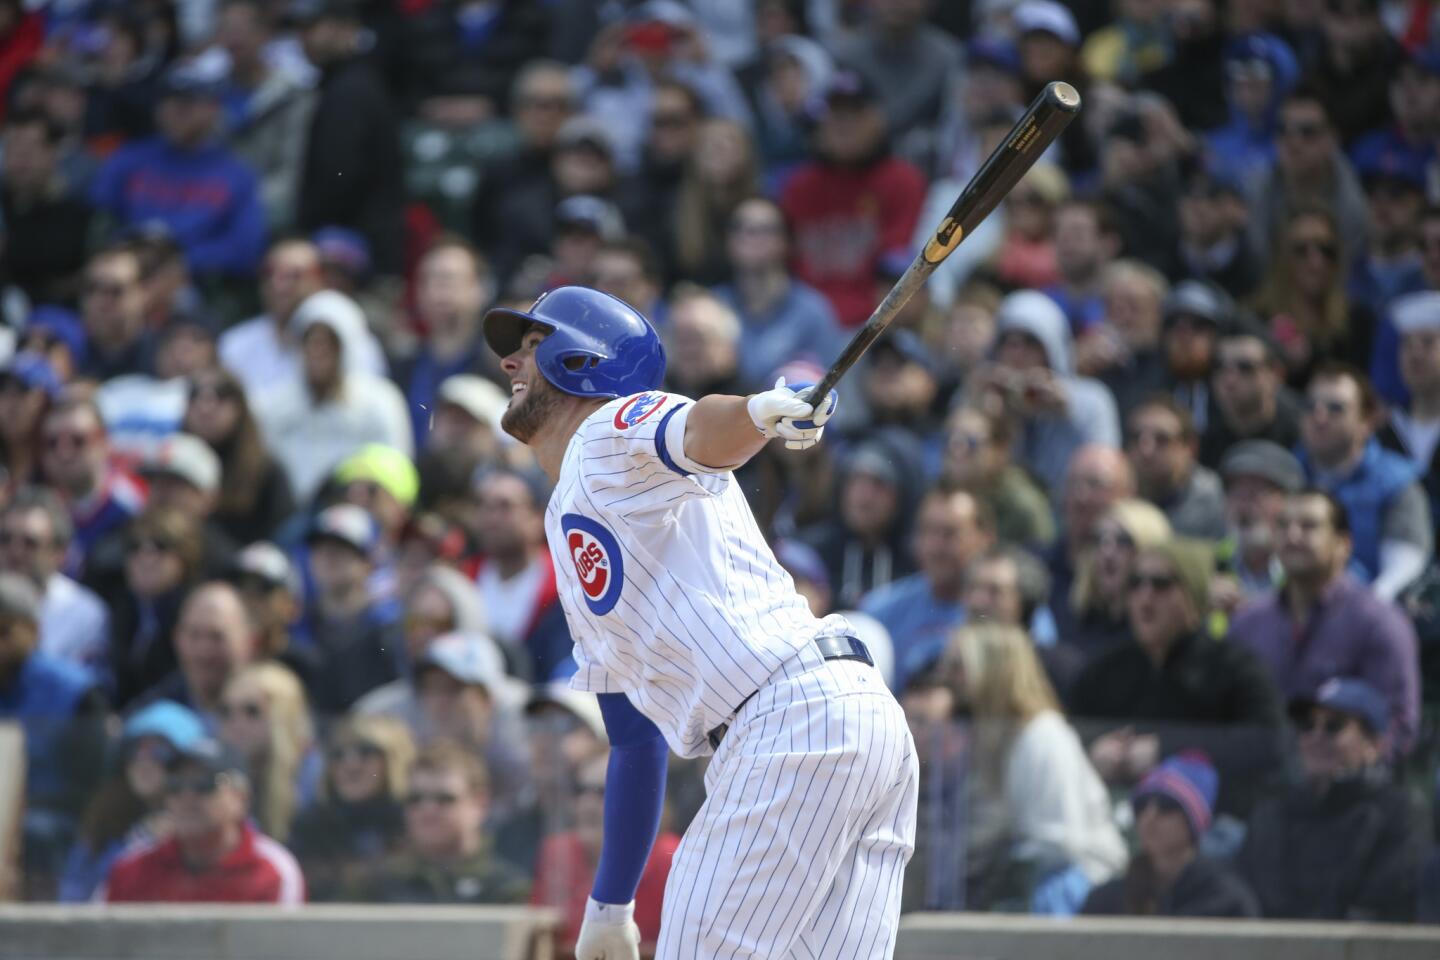 Kris Bryant hits an RBI single during the fifth inning.